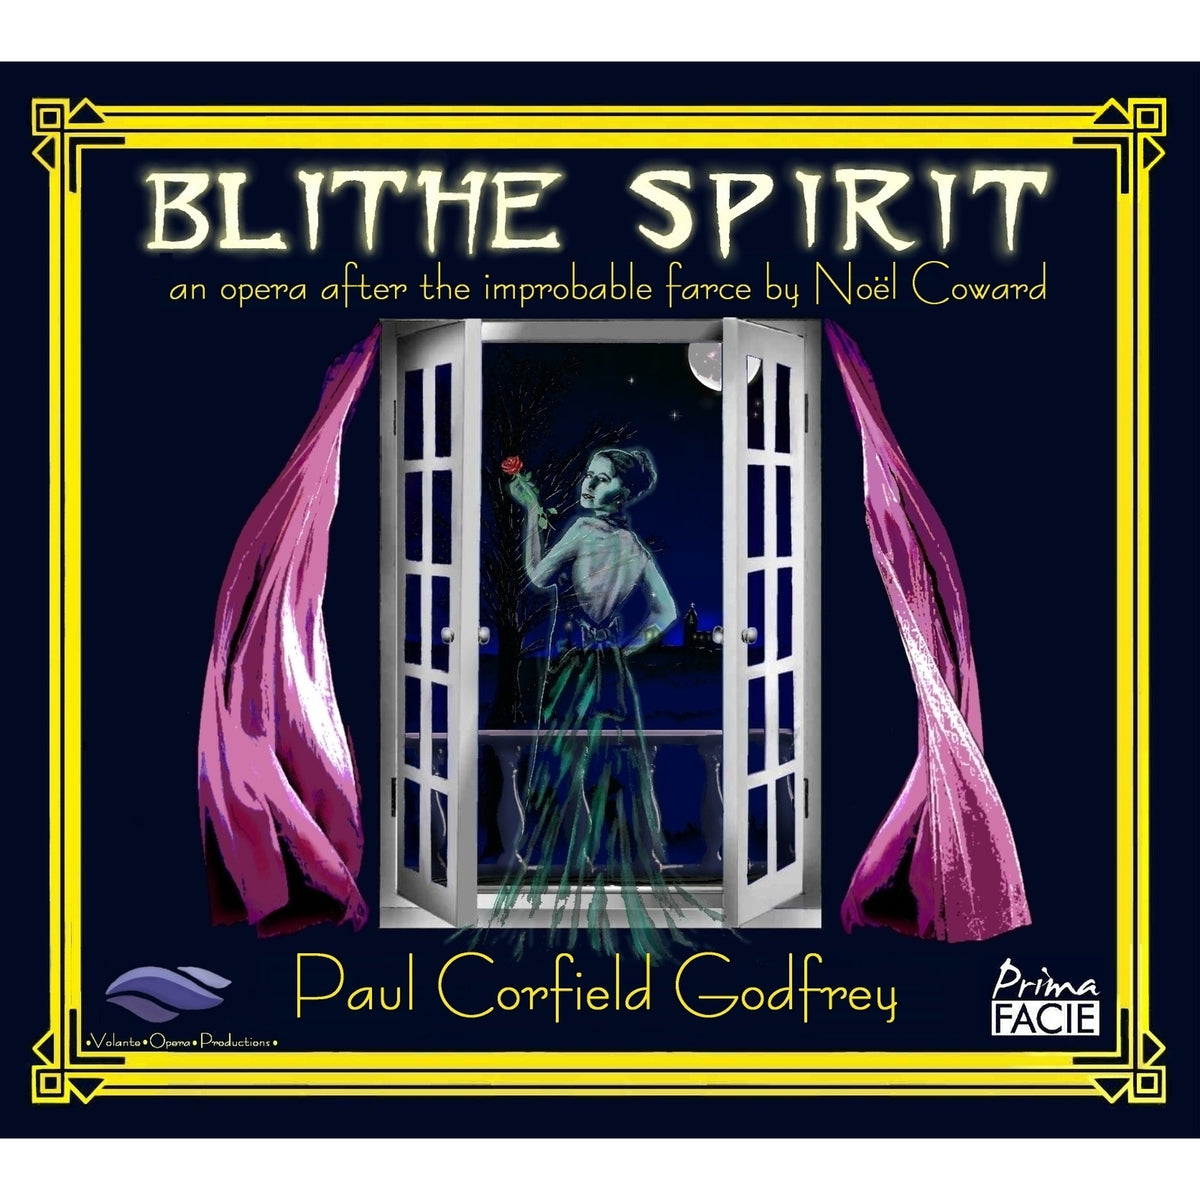 Volante Opera Productions - Blithe Spirit: an opera after the improbable farce by Noel Coward - PFCD222